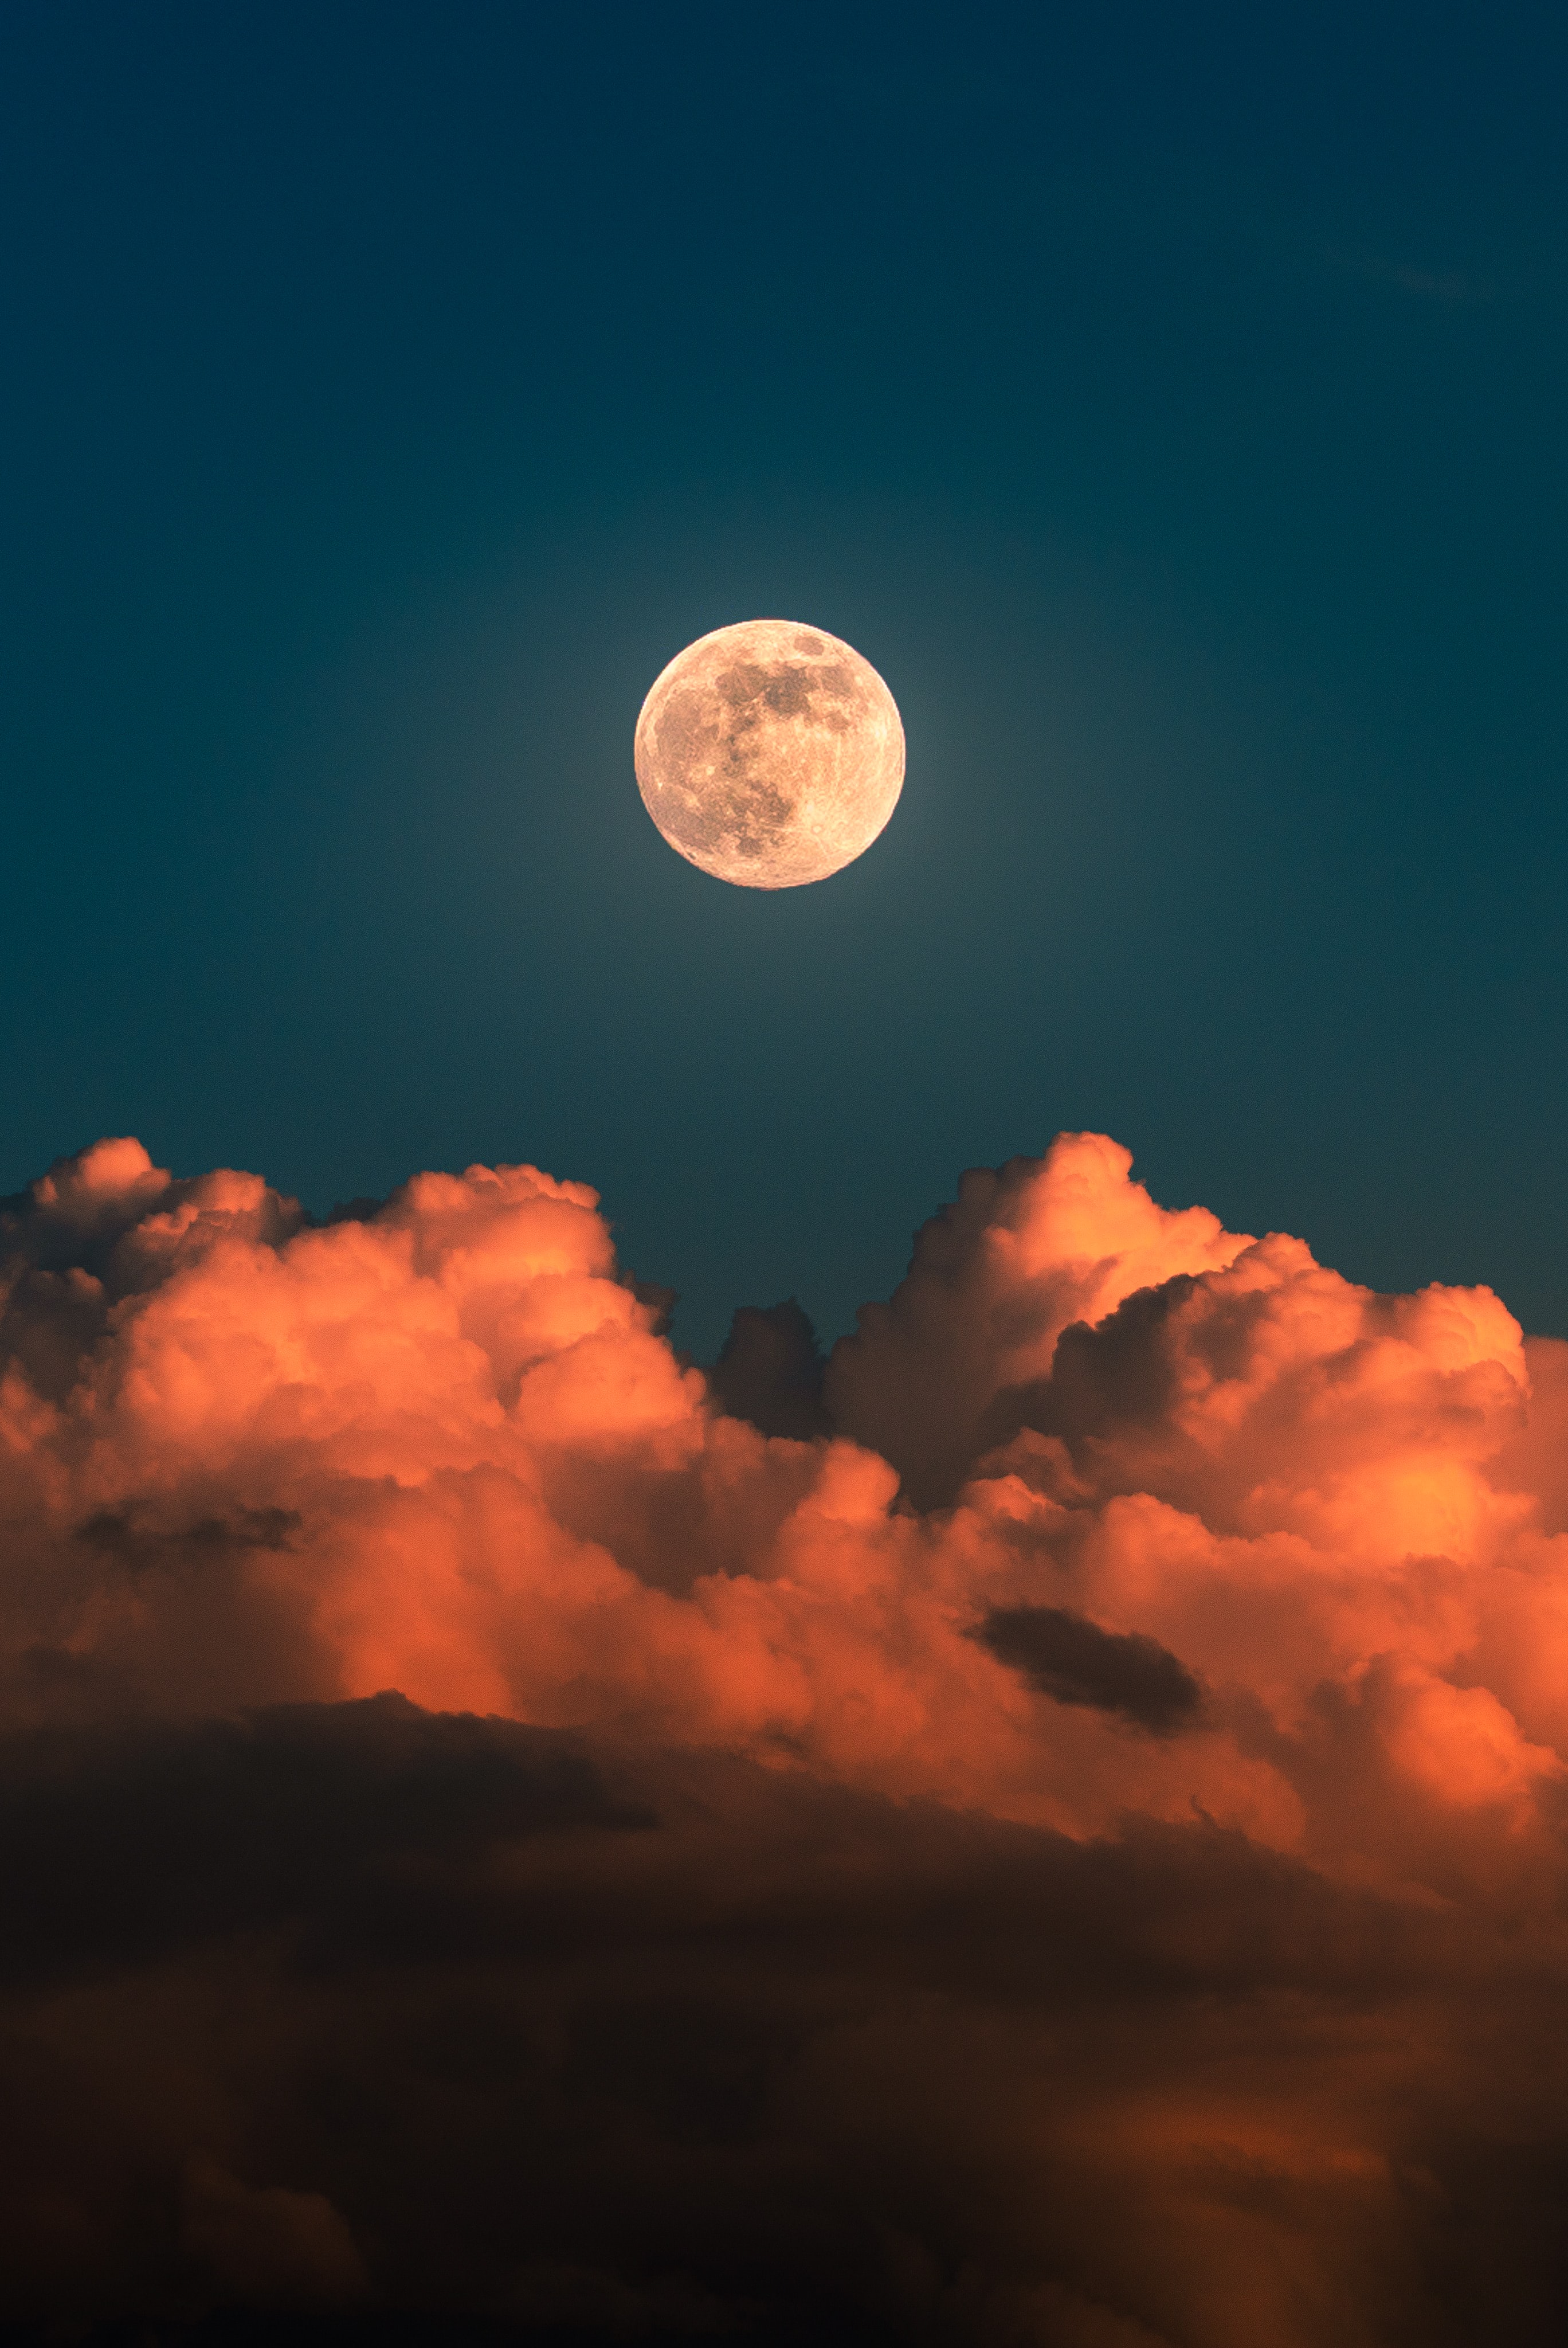 moon, clouds, full moon, nature, sky wallpaper for mobile